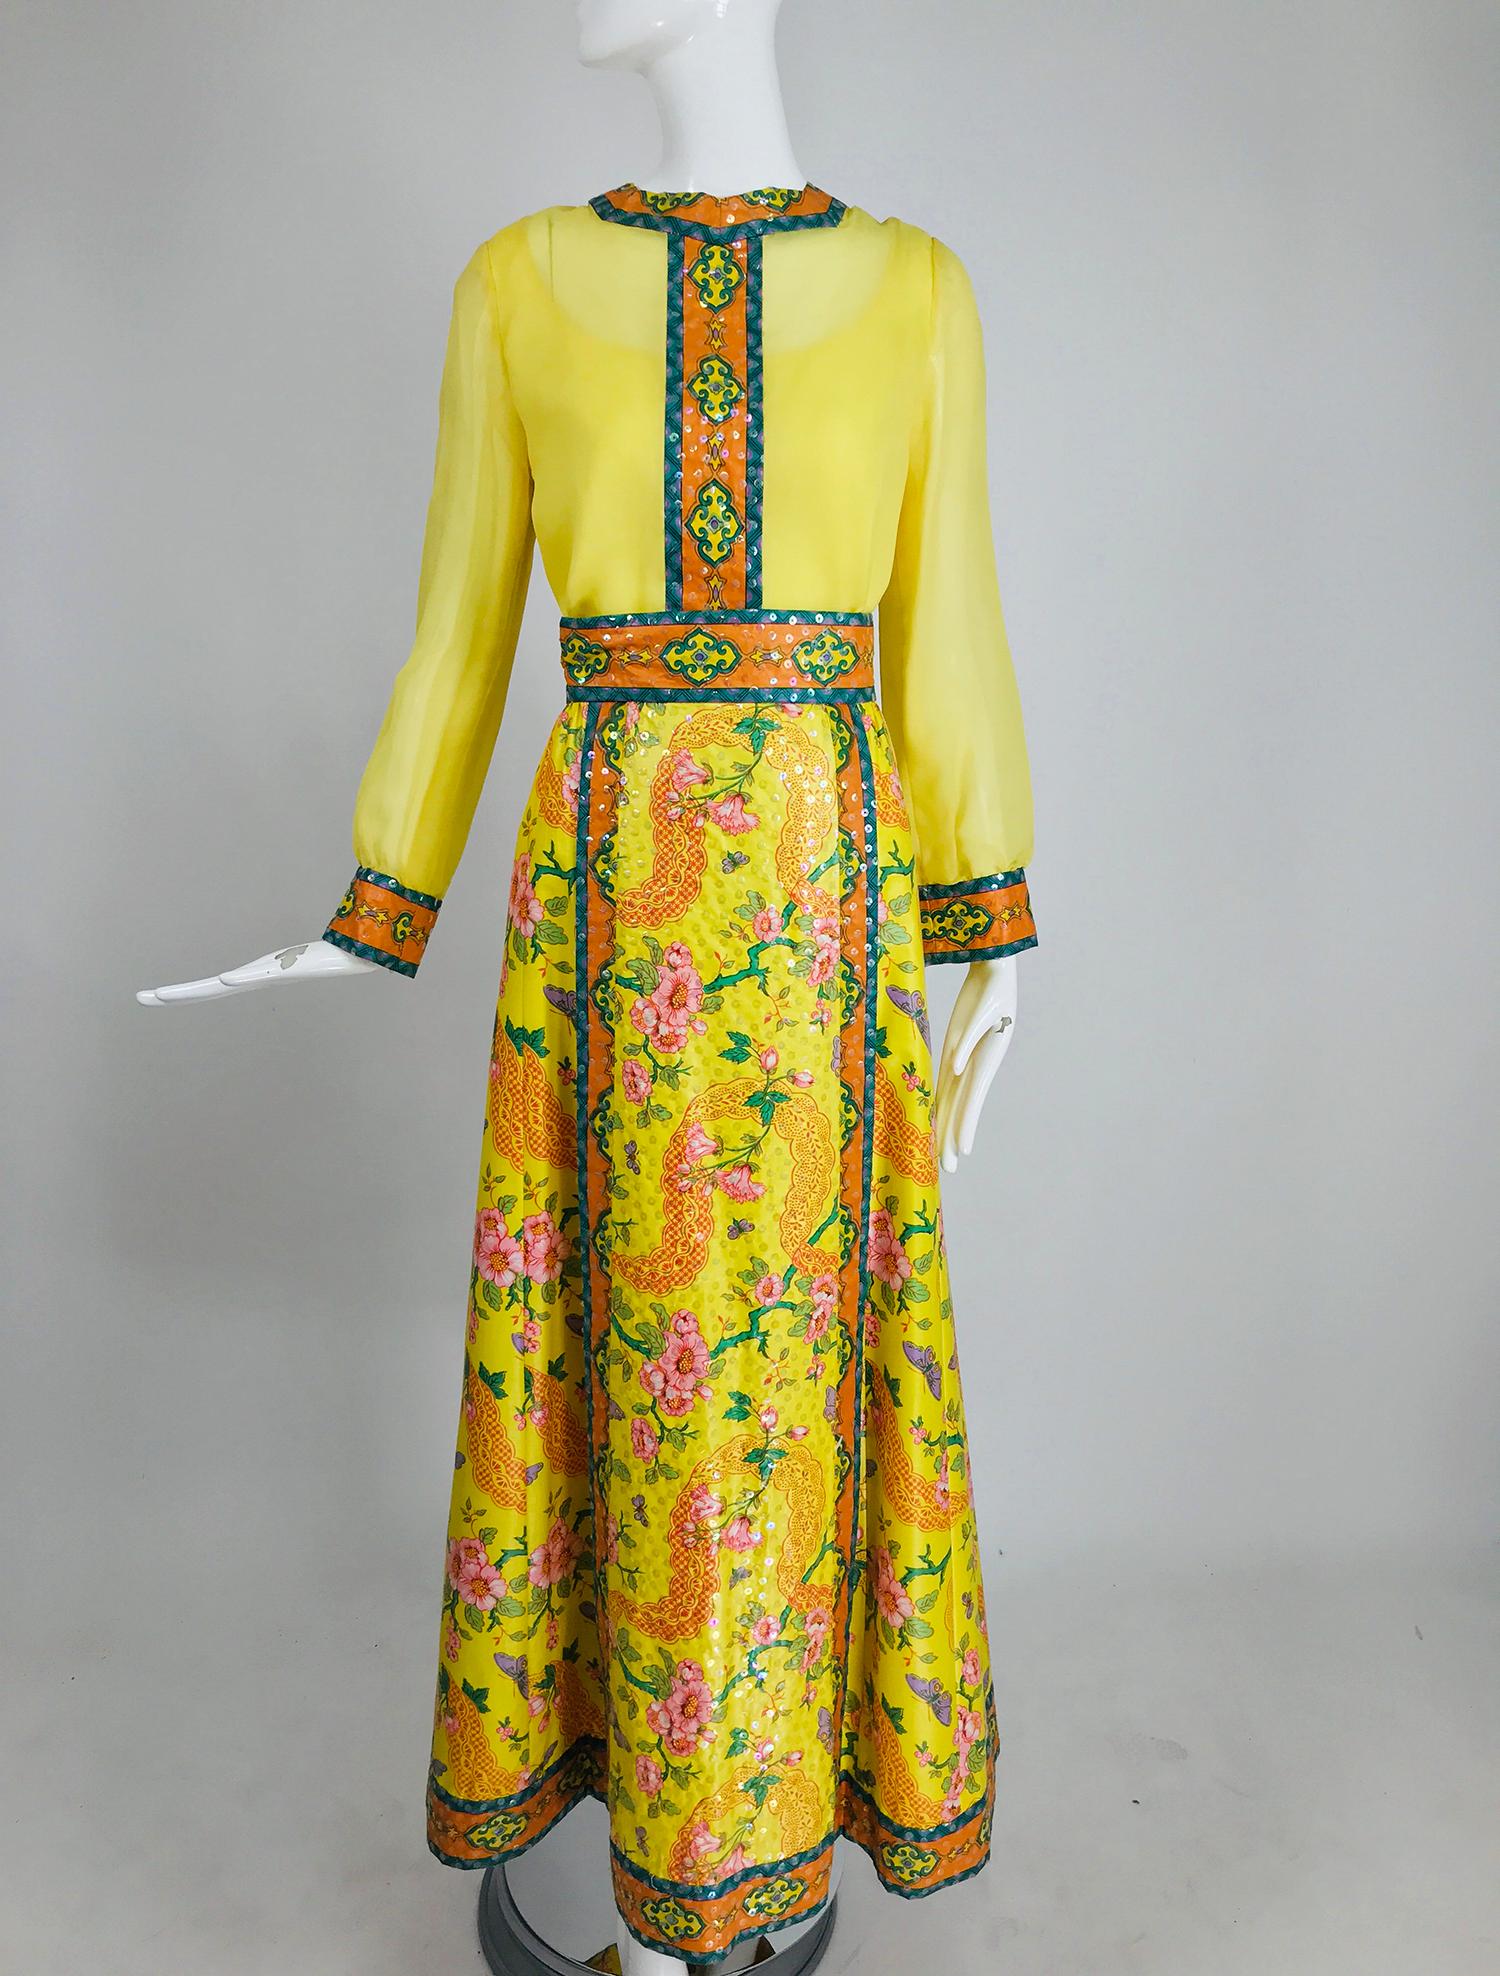 Vintage Tina Leser Original sequin, citrus bright print maxi skirt and blouse set from the 1960s. Tina Leser was known for her at home and resort wear in, novel for the time, combinations of fabrics and styles based on ethnic designs inspired by the